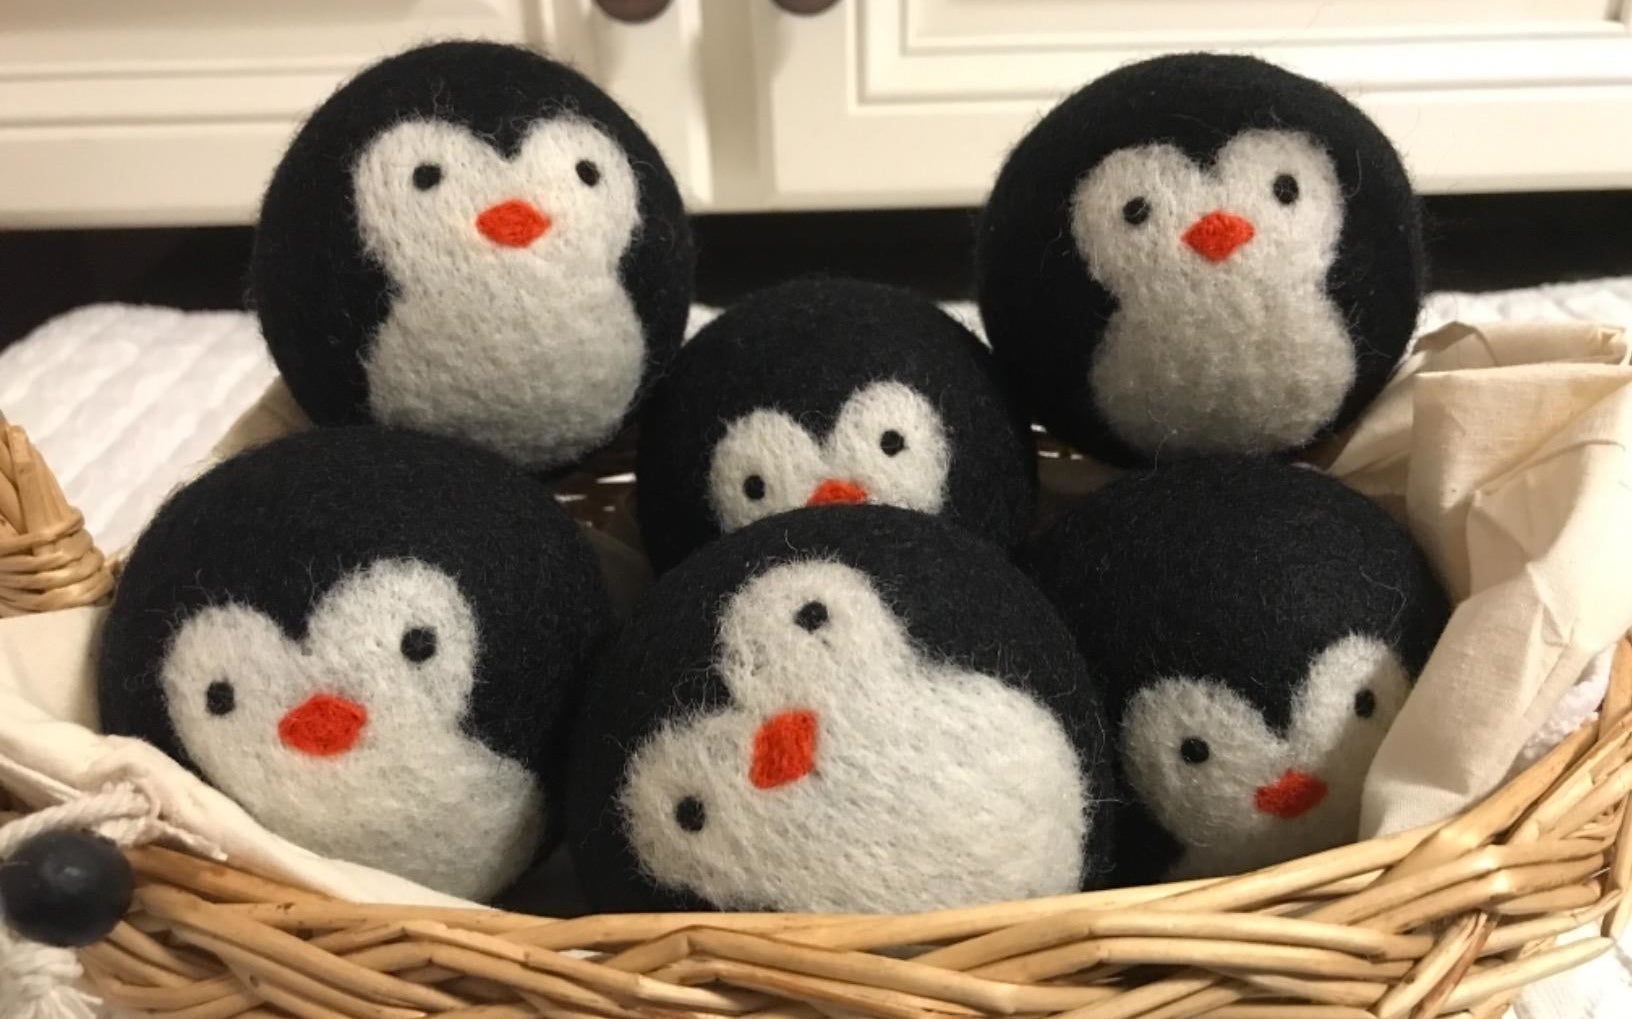 a reviewer photo of the black and white dryer balls designed to look like penguins piled into a basket